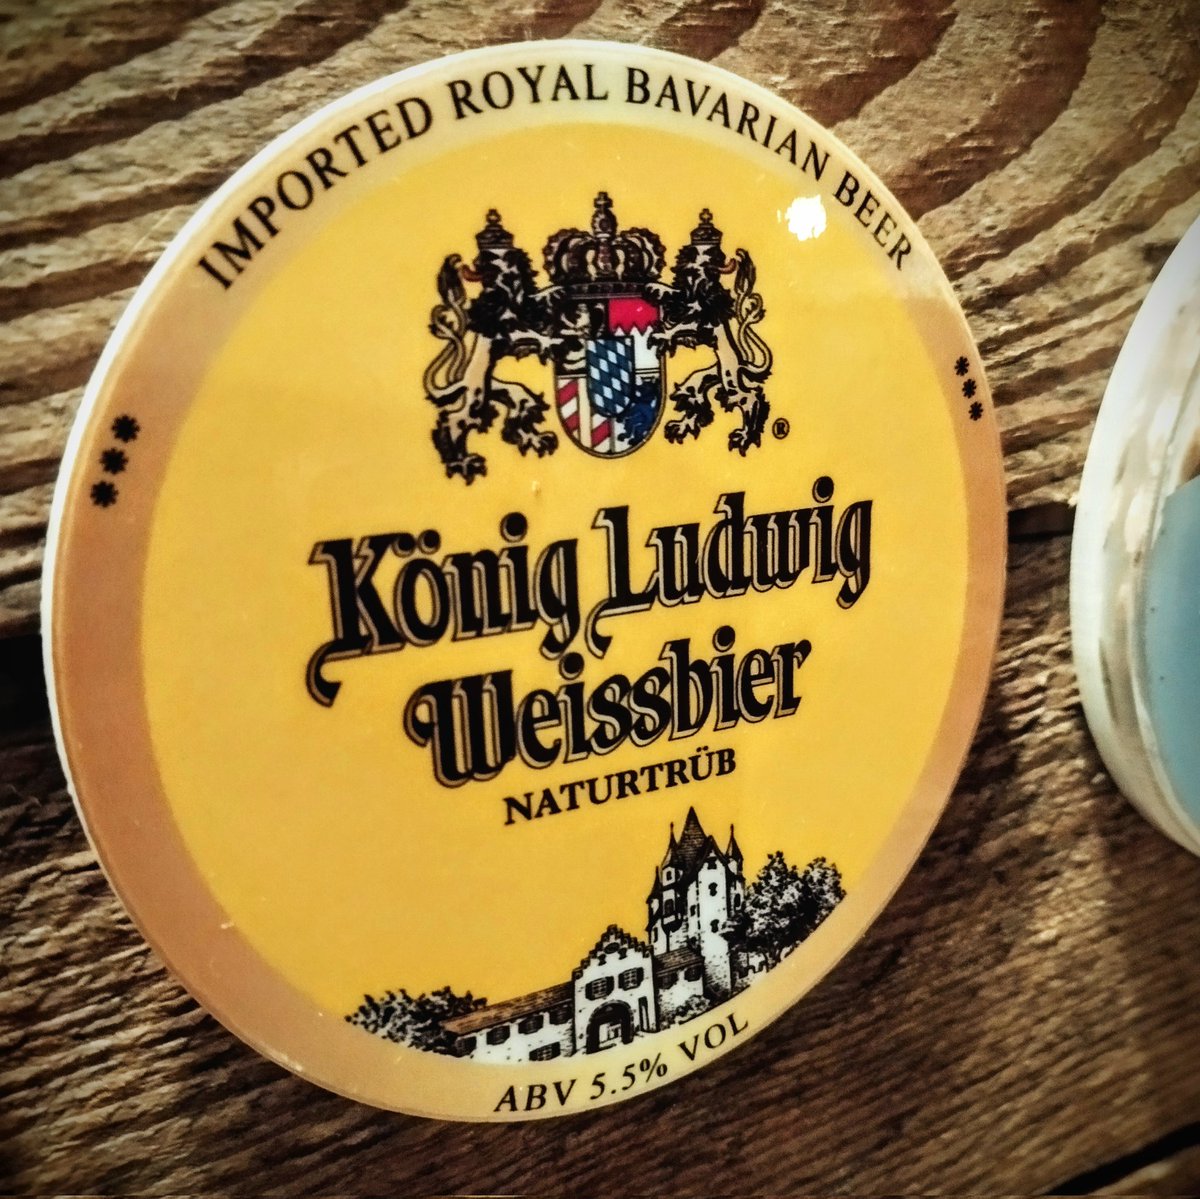 New Weissbier on tap from Konig Ludwig - the originators of the Bavarian purity law from 1516 and the founding family of the Oktoberfest. Open from 4pm 👍 #colwynbay #alehouse #pub